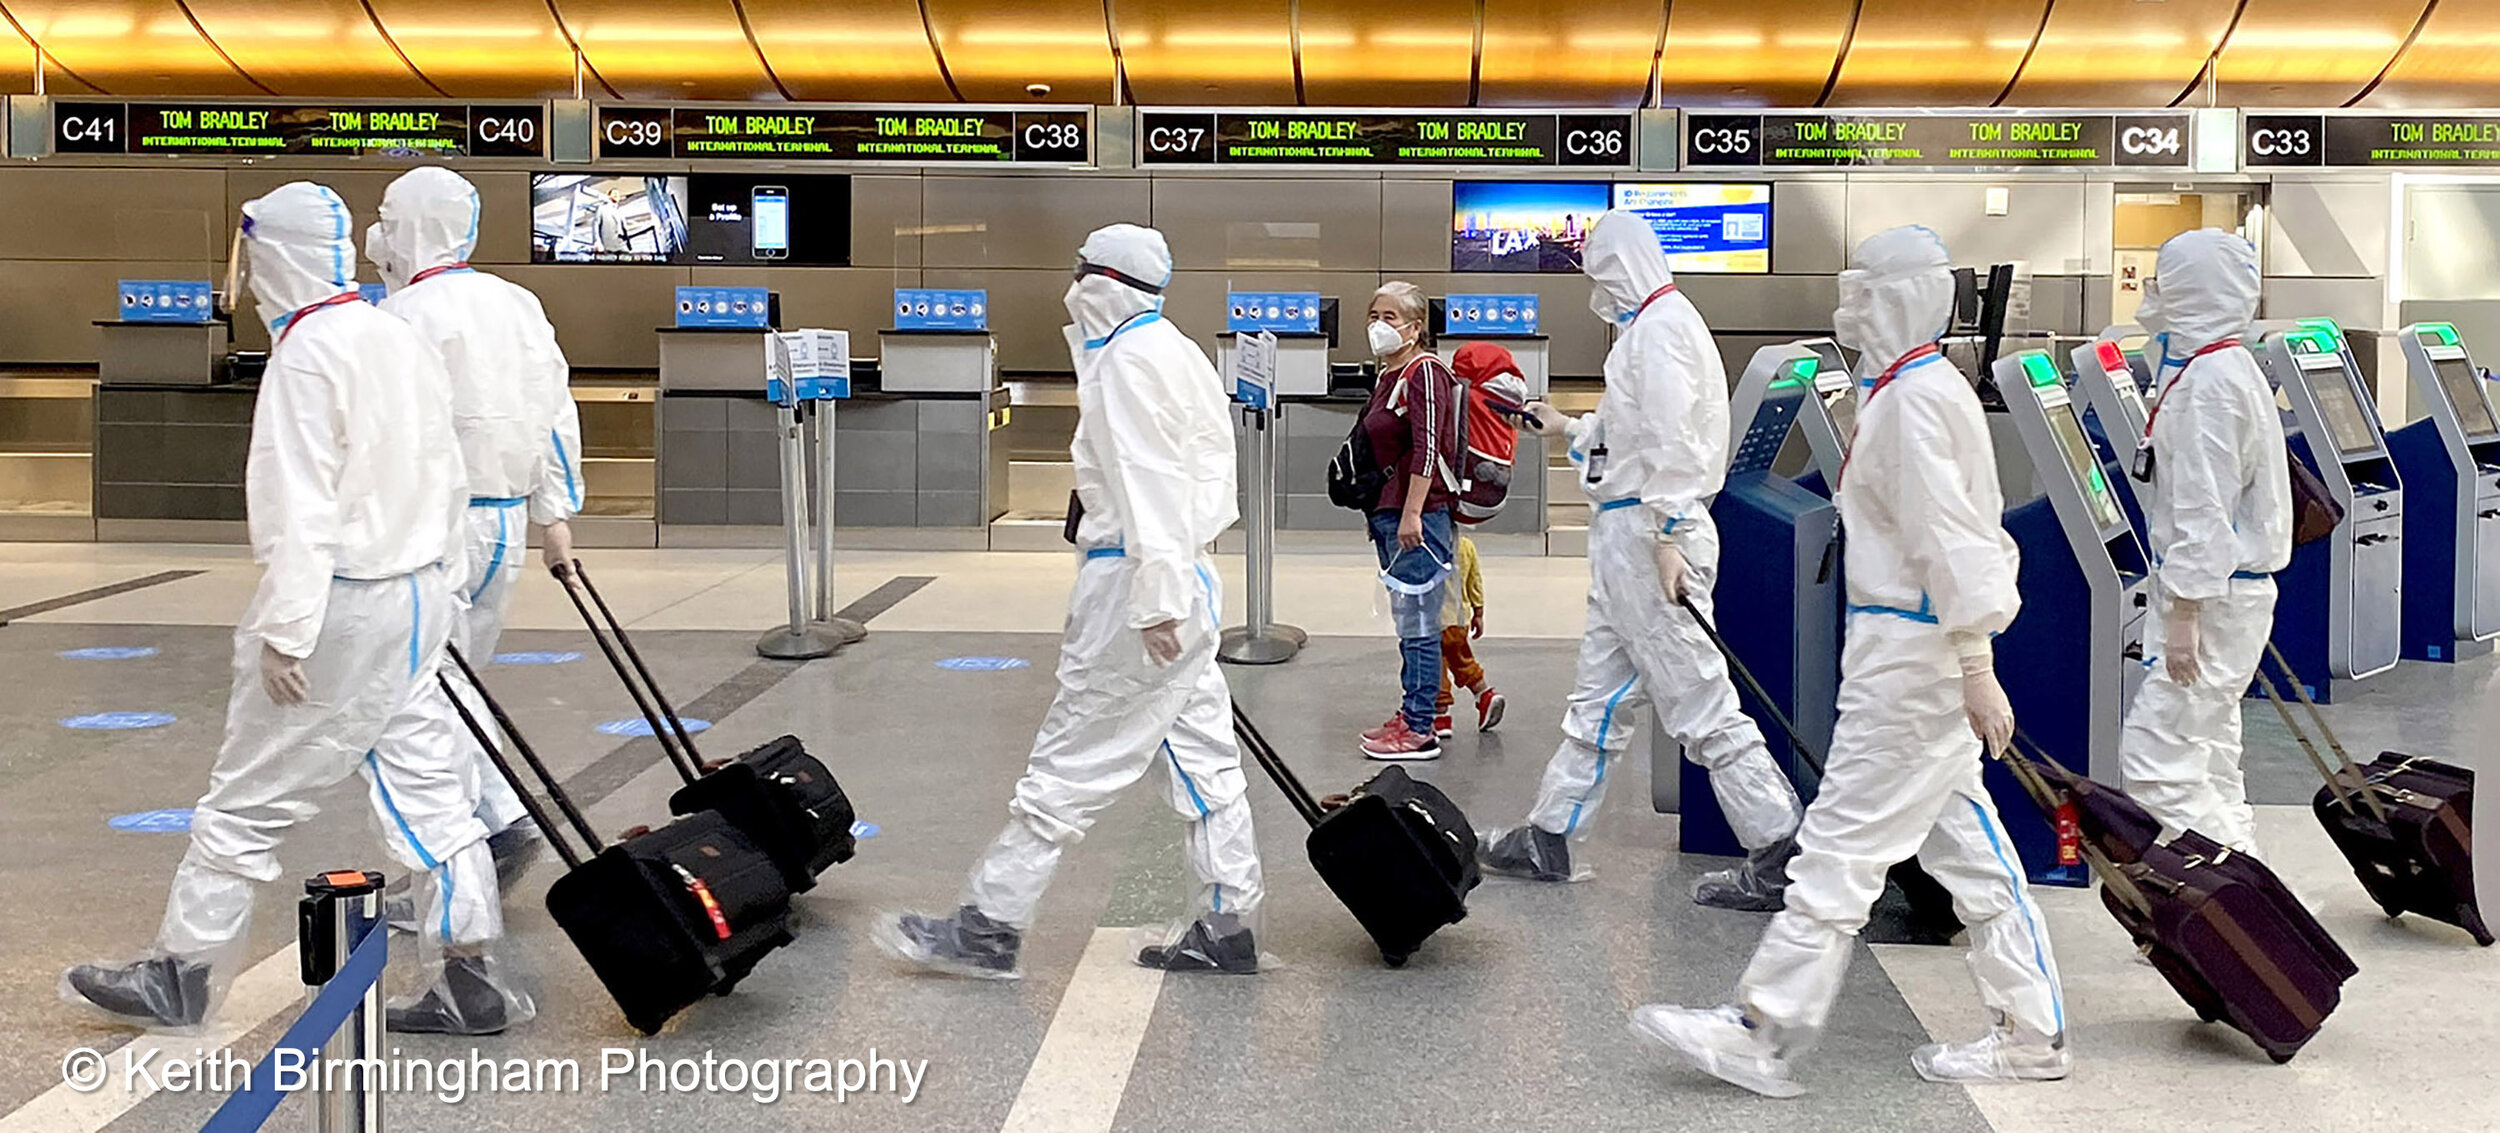  A woman with a child wearing masks looks on as an airline crew wearing full personal protective equipment due to the Coronavirus Pandemic walks through the Tom Bradley International Terminal at LAX in Los Angeles on Tuesday, November 17, 2020. (Phot